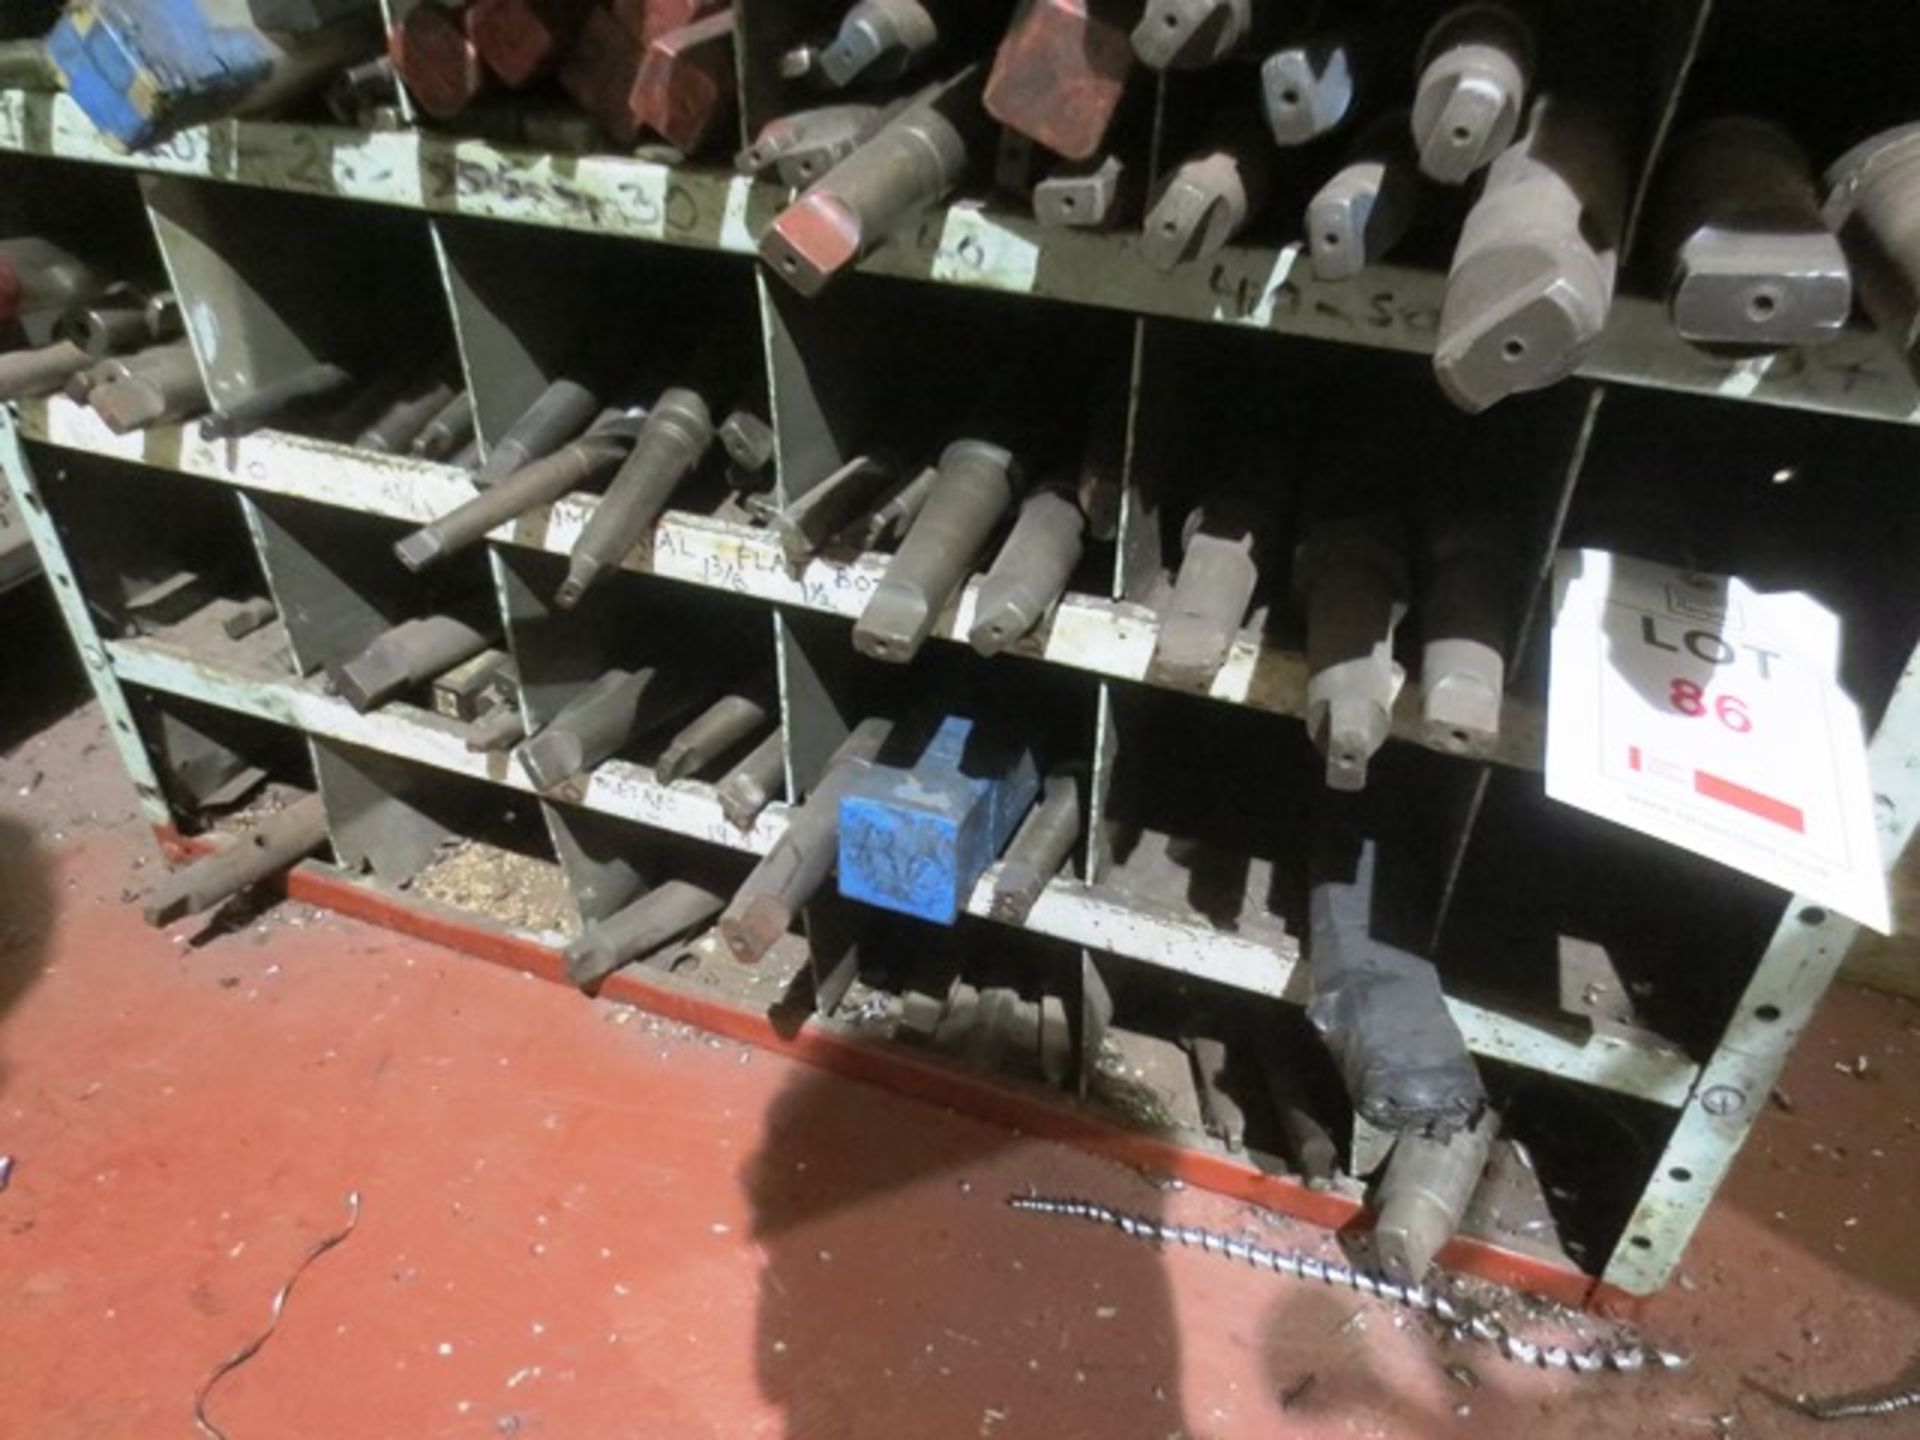 Contents of three shelves including various imperial/metric flat-bottomed drills